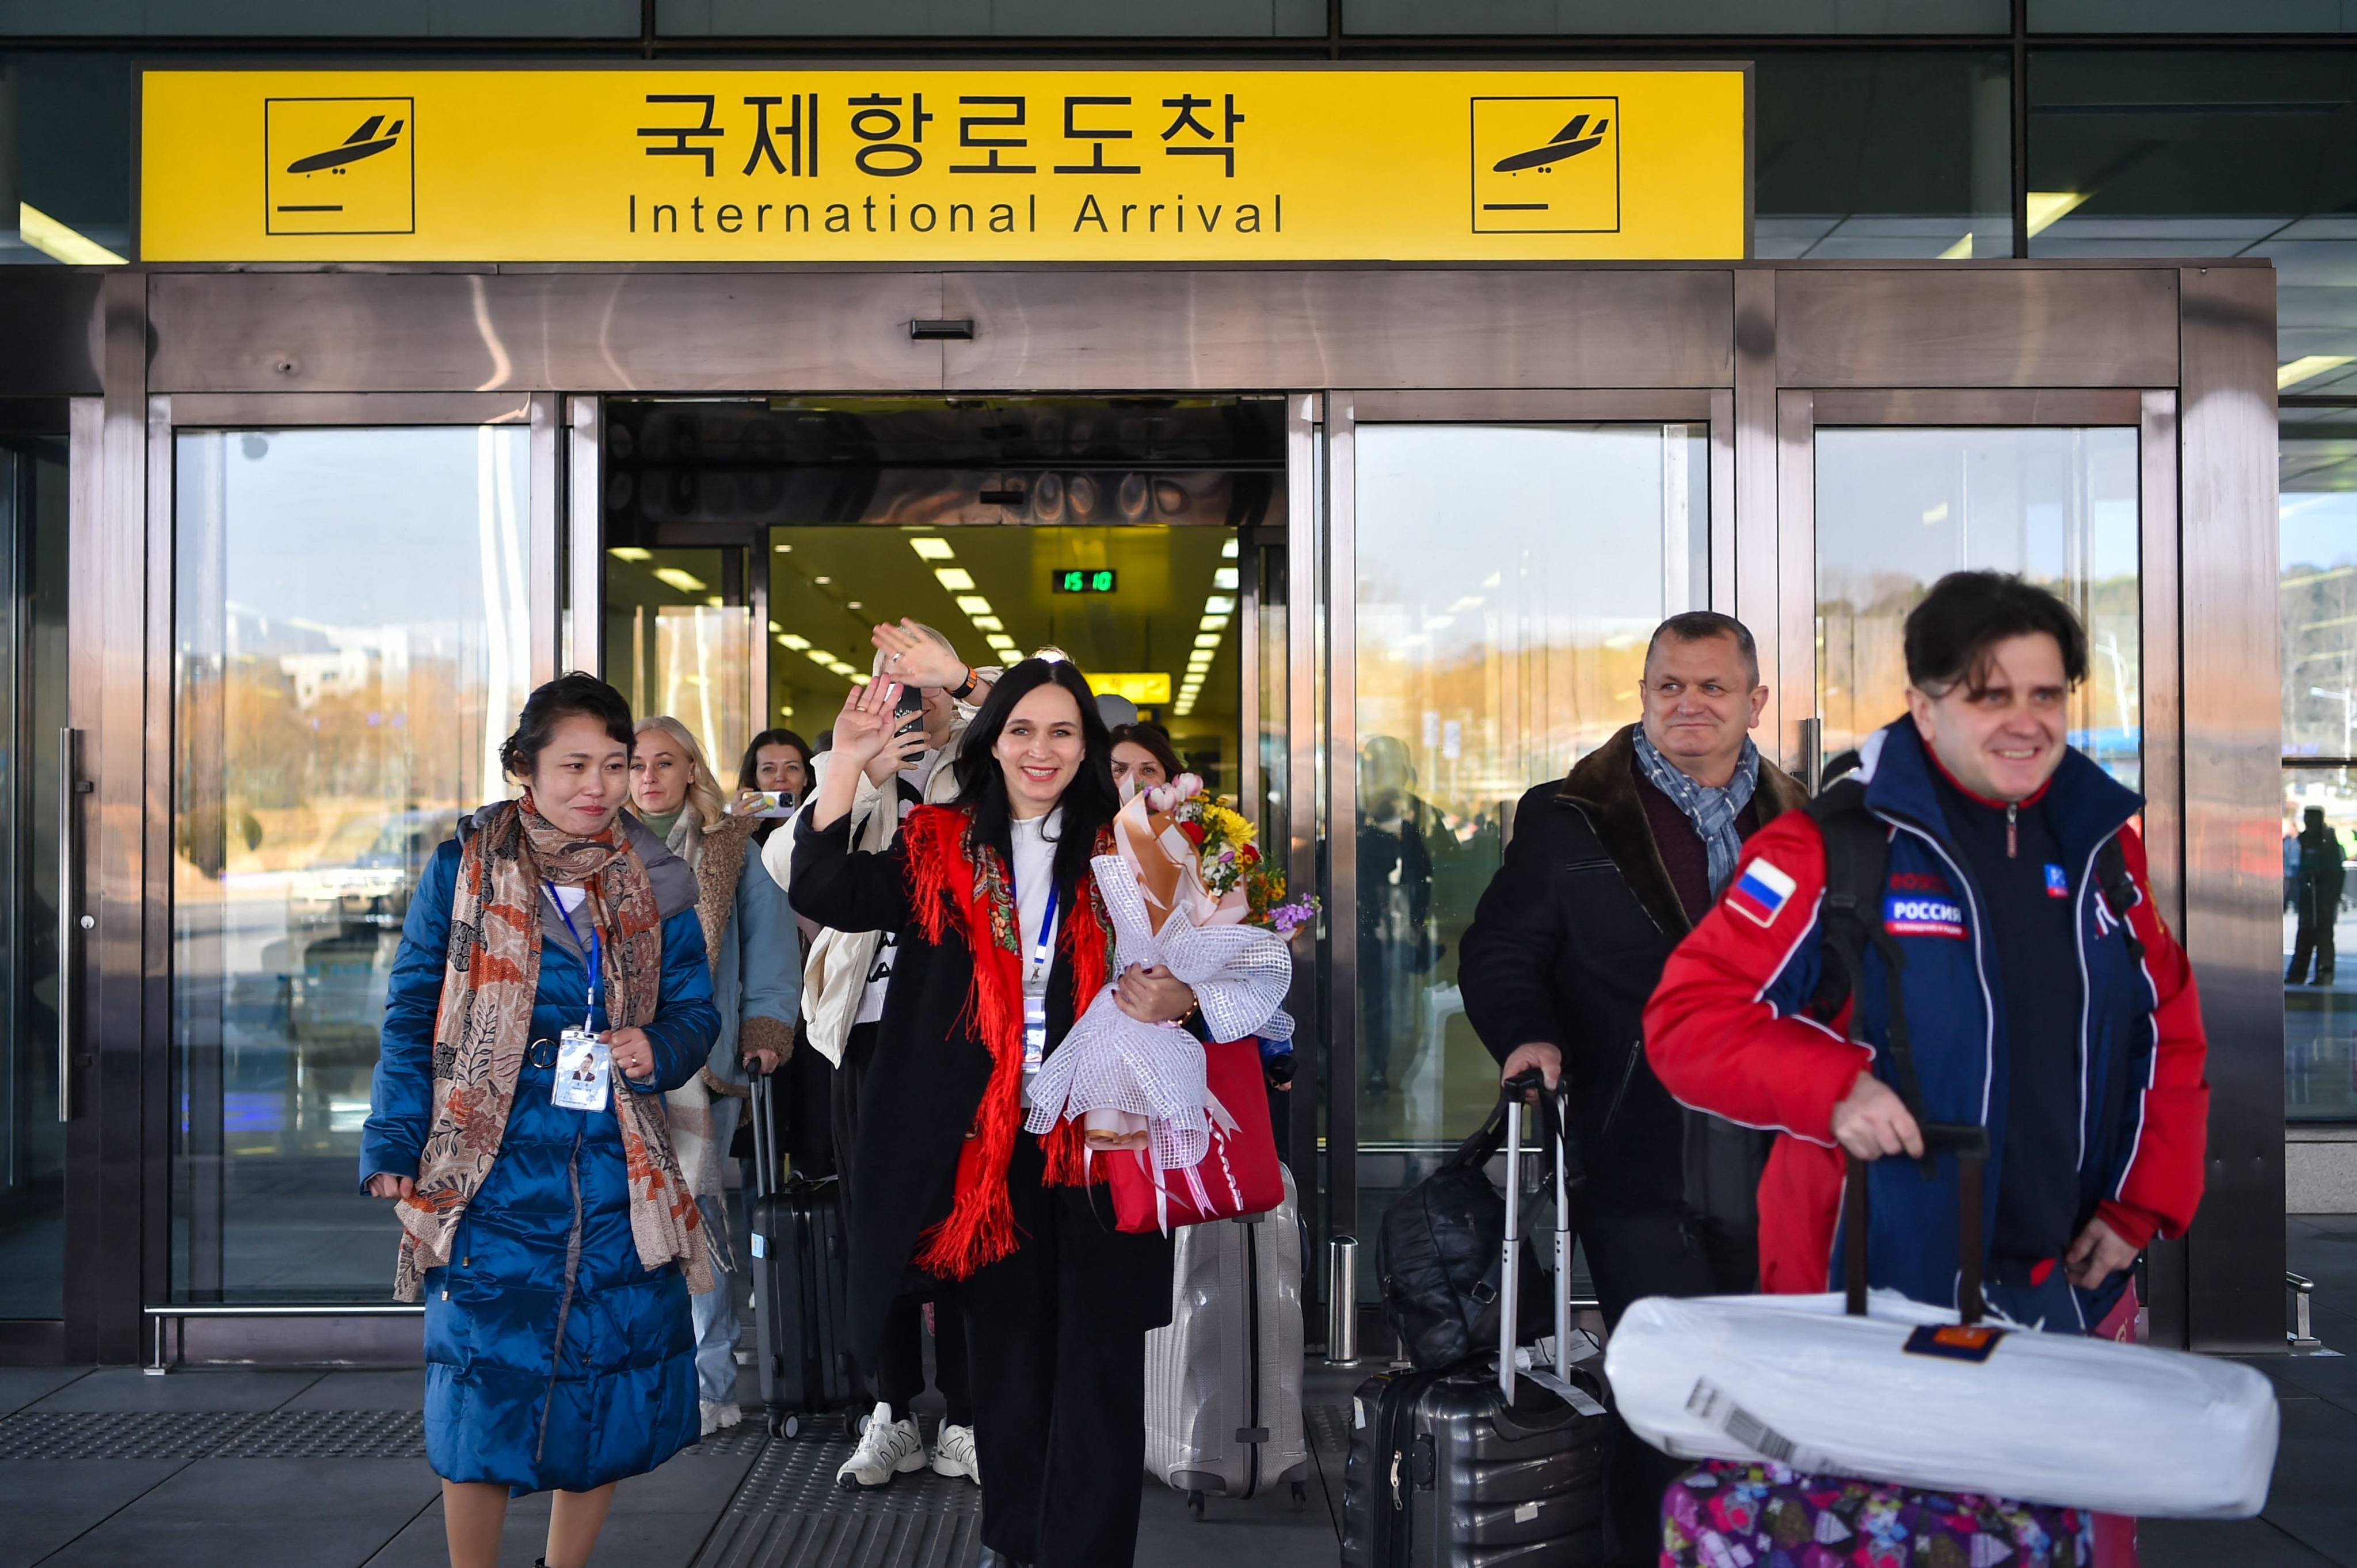 Russian tourists arriving in Pyongyang in North Korea on Friday. Photo: AFP